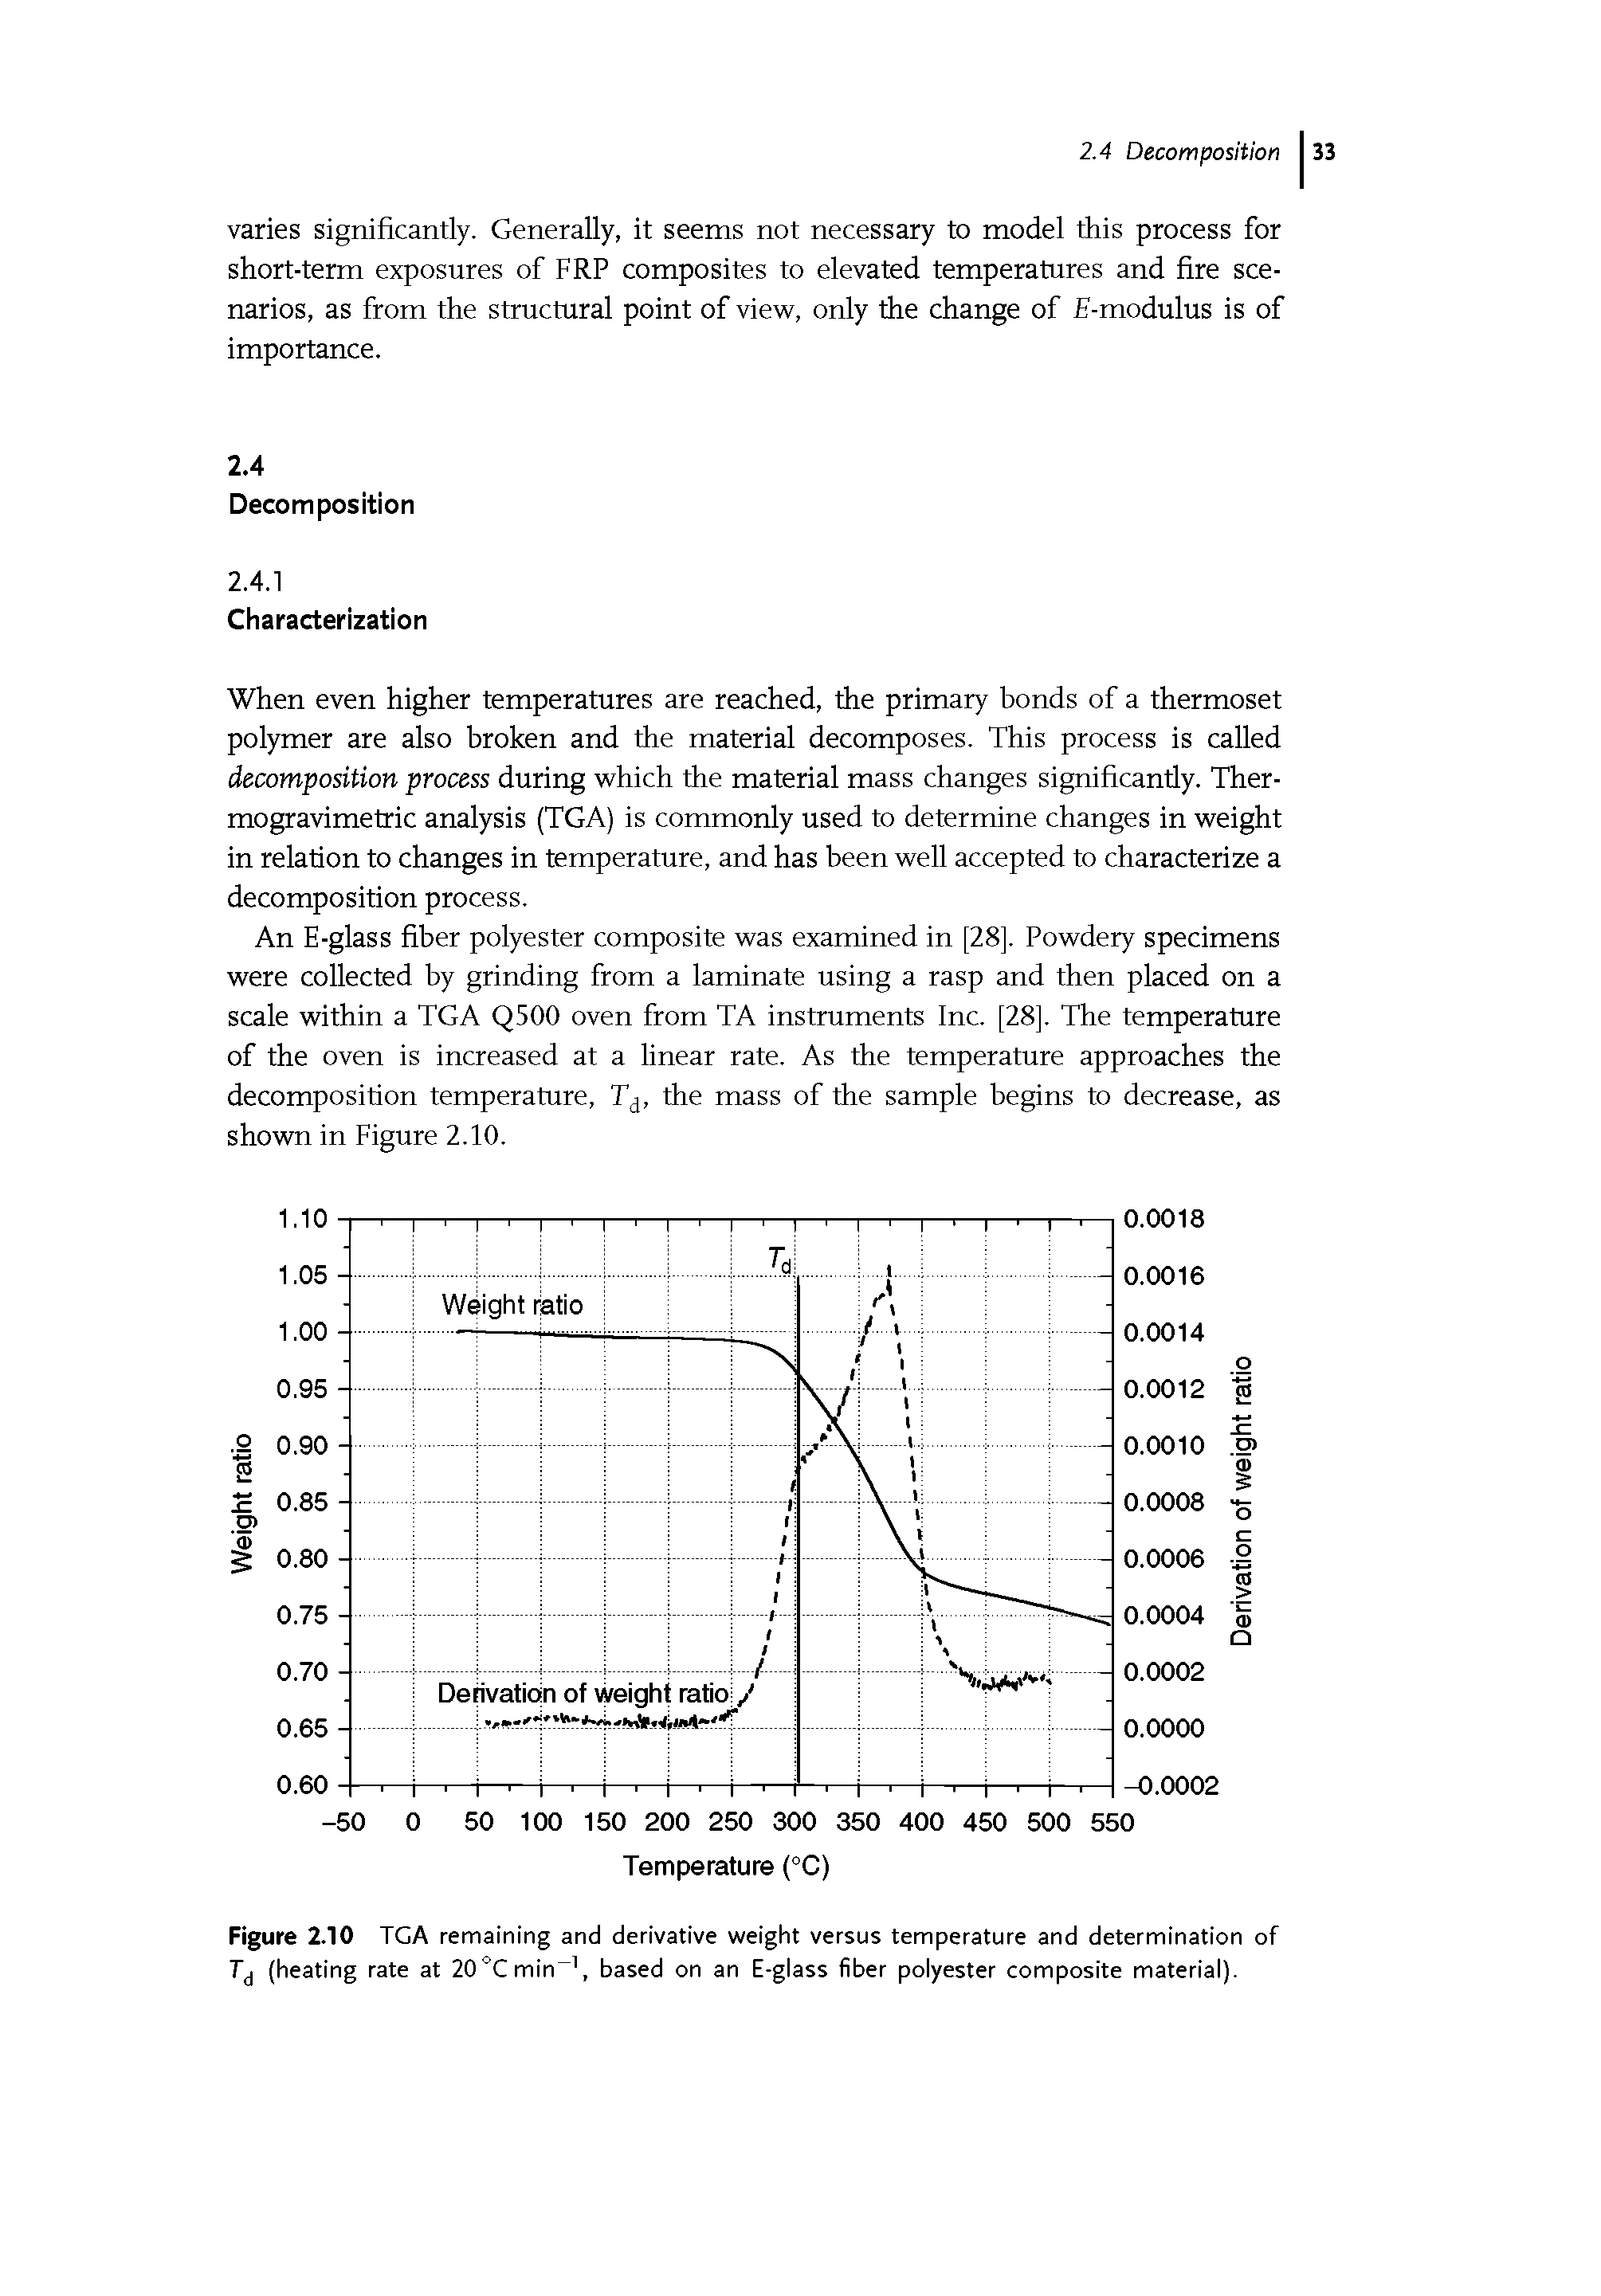 Figure 2.10 TGA remaining and derivative weight versus temperature and determination of Tj (heating rate at 20°Cmin , based on an E-glass fiber polyester composite material).